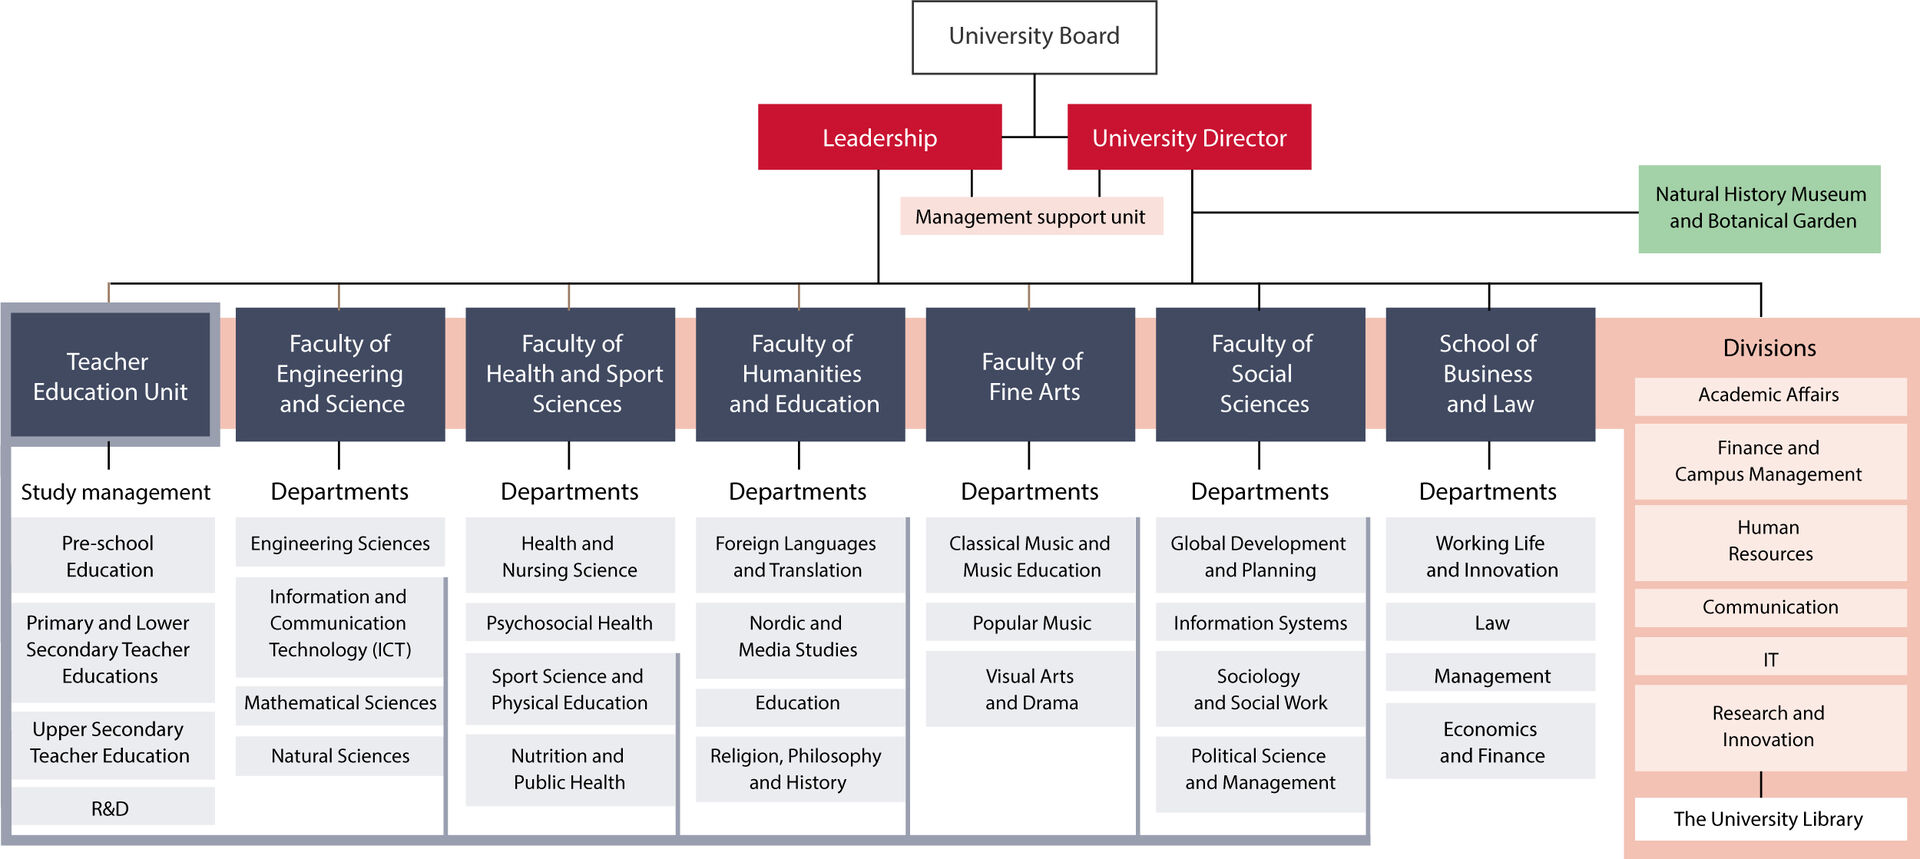 Illustration of organisational map for the University of Agder